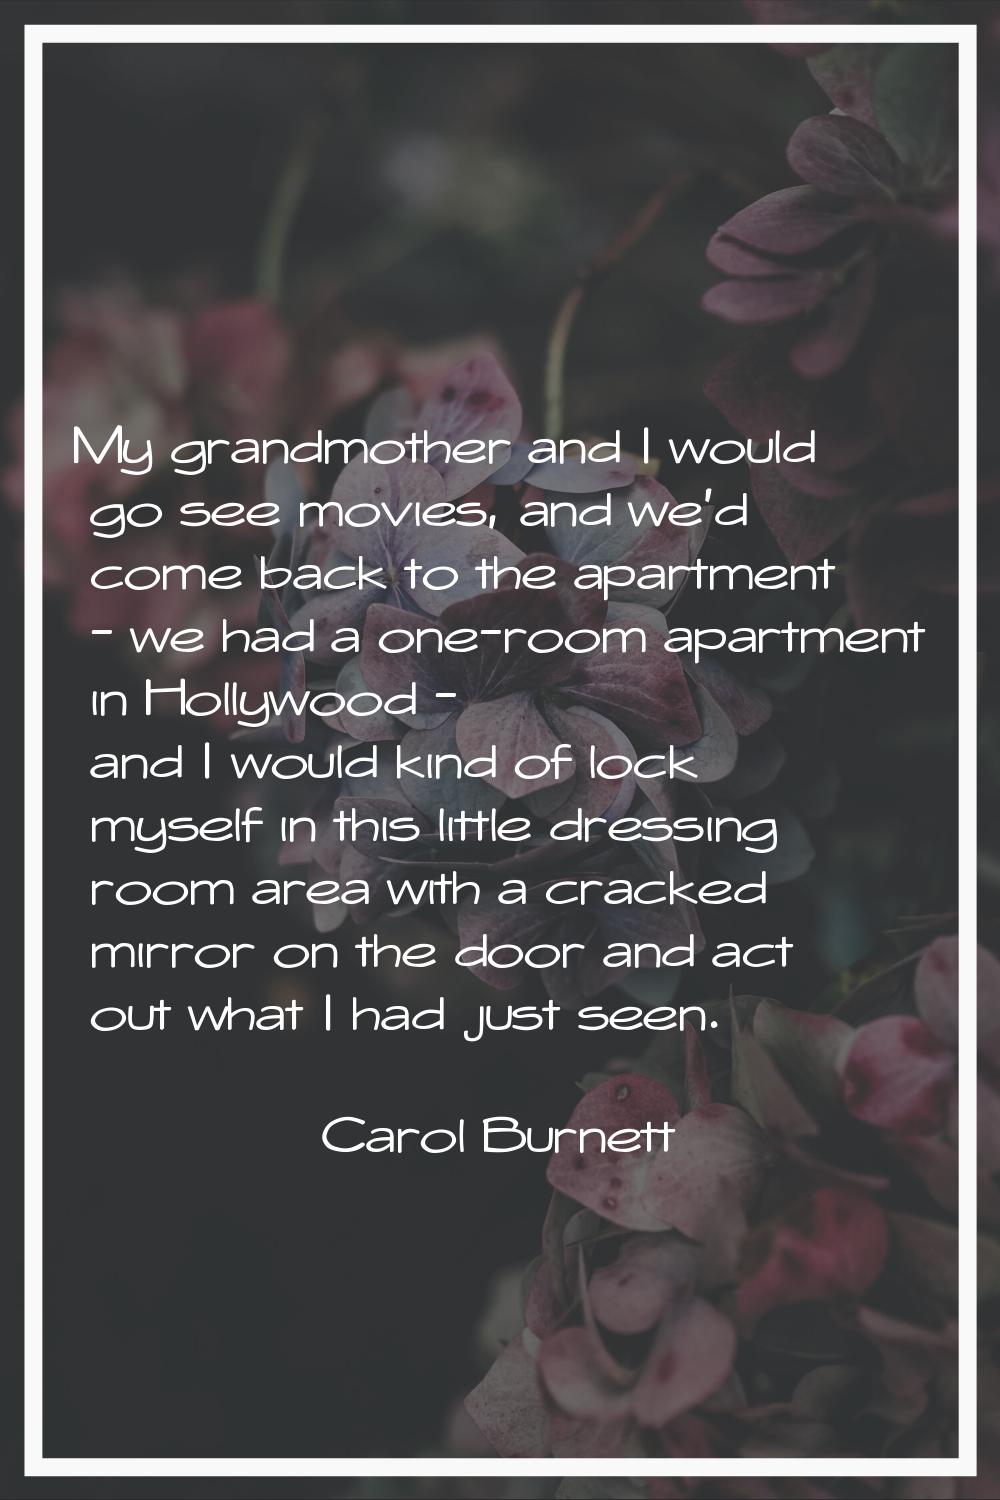 My grandmother and I would go see movies, and we'd come back to the apartment - we had a one-room a